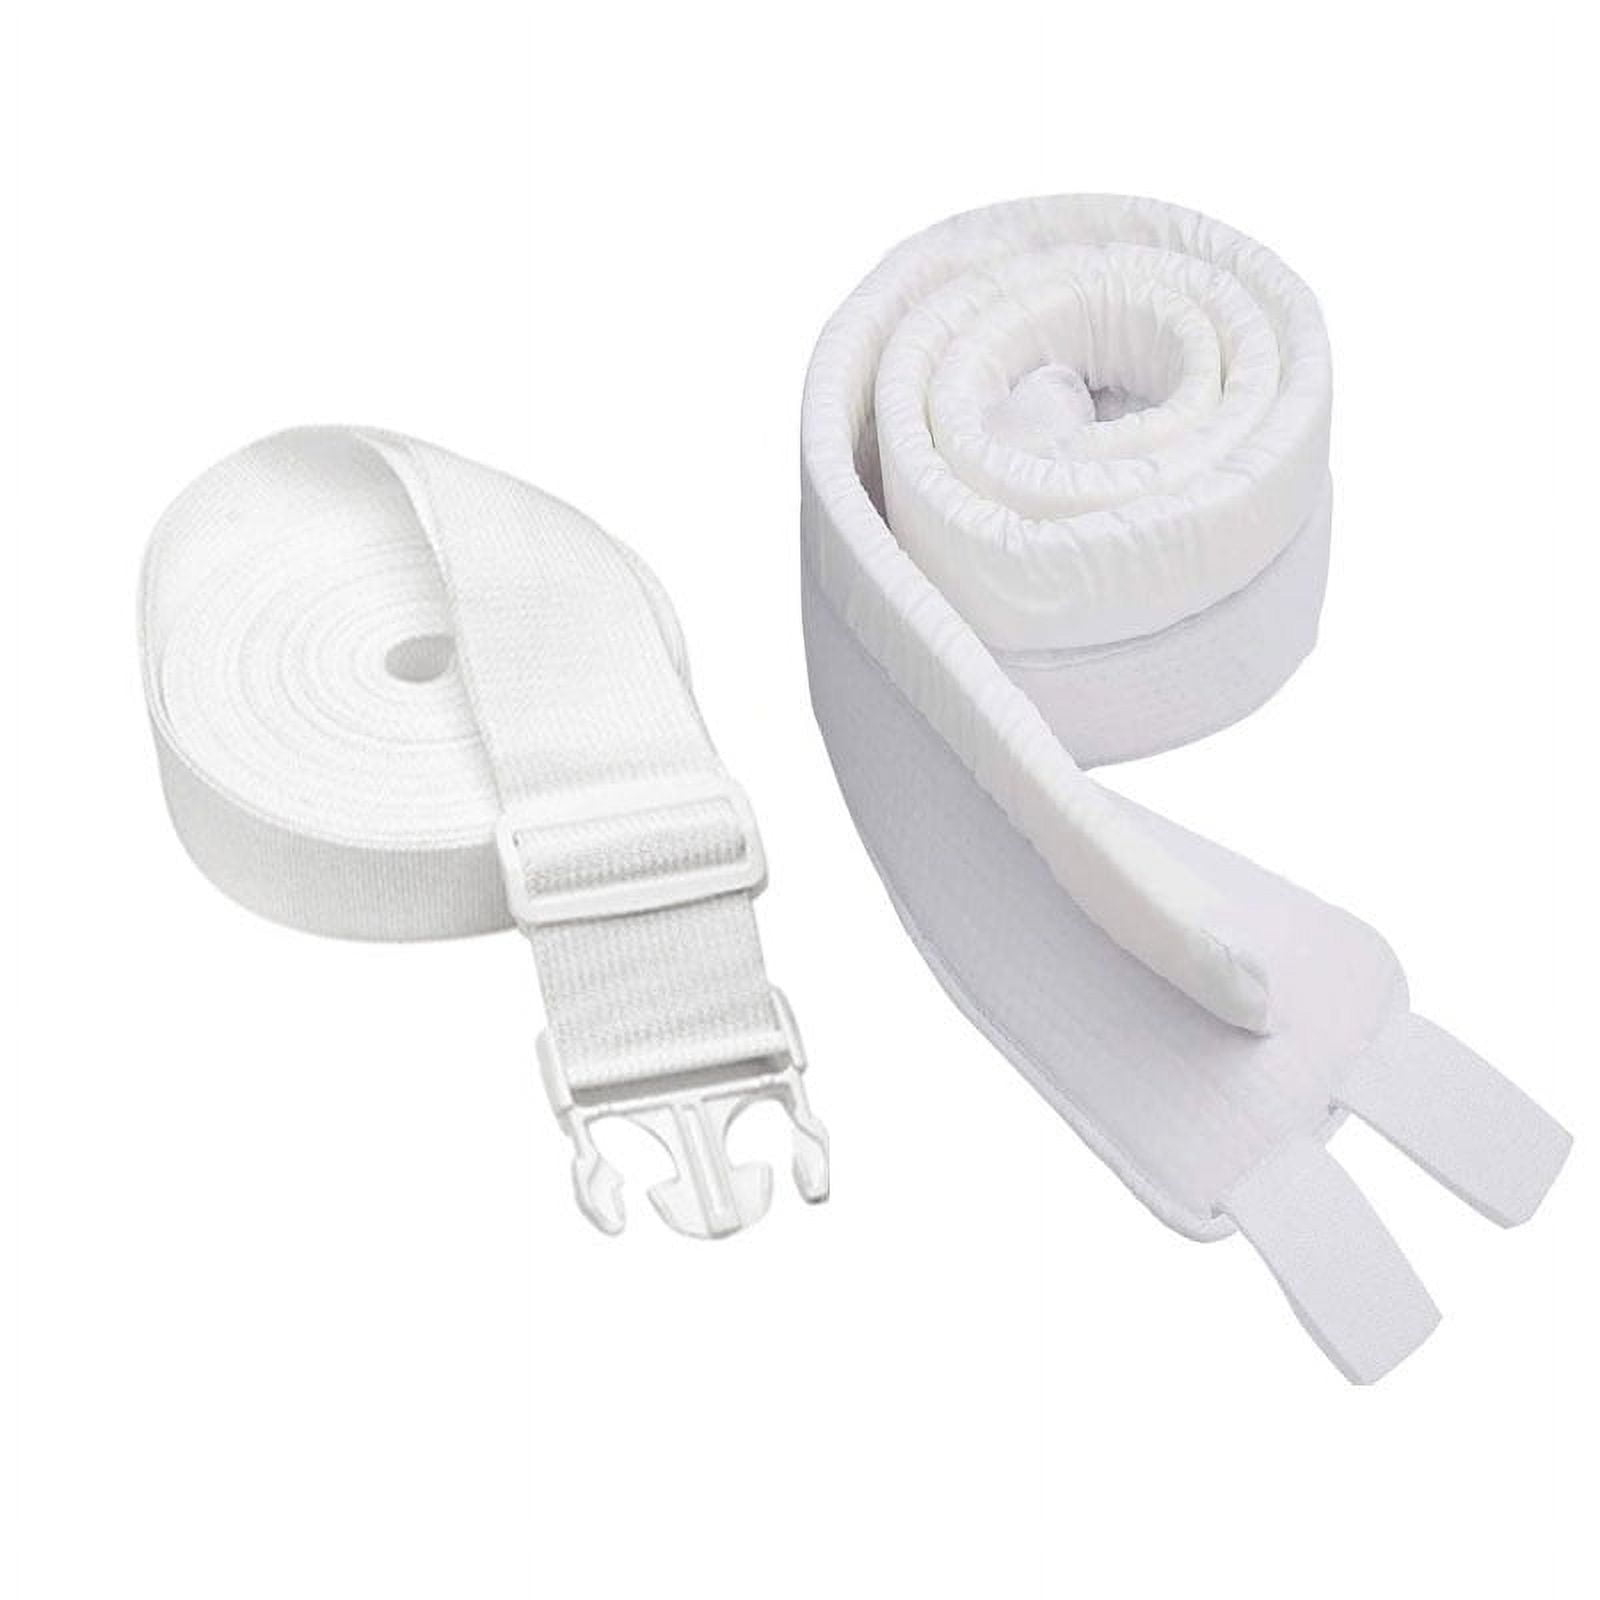 Sanmadrola Bed Bridge Connector with Strap Twin to King Bed Convertor Mattress Connector with Protector, Washable and Replaceable, 78.8''x11.8